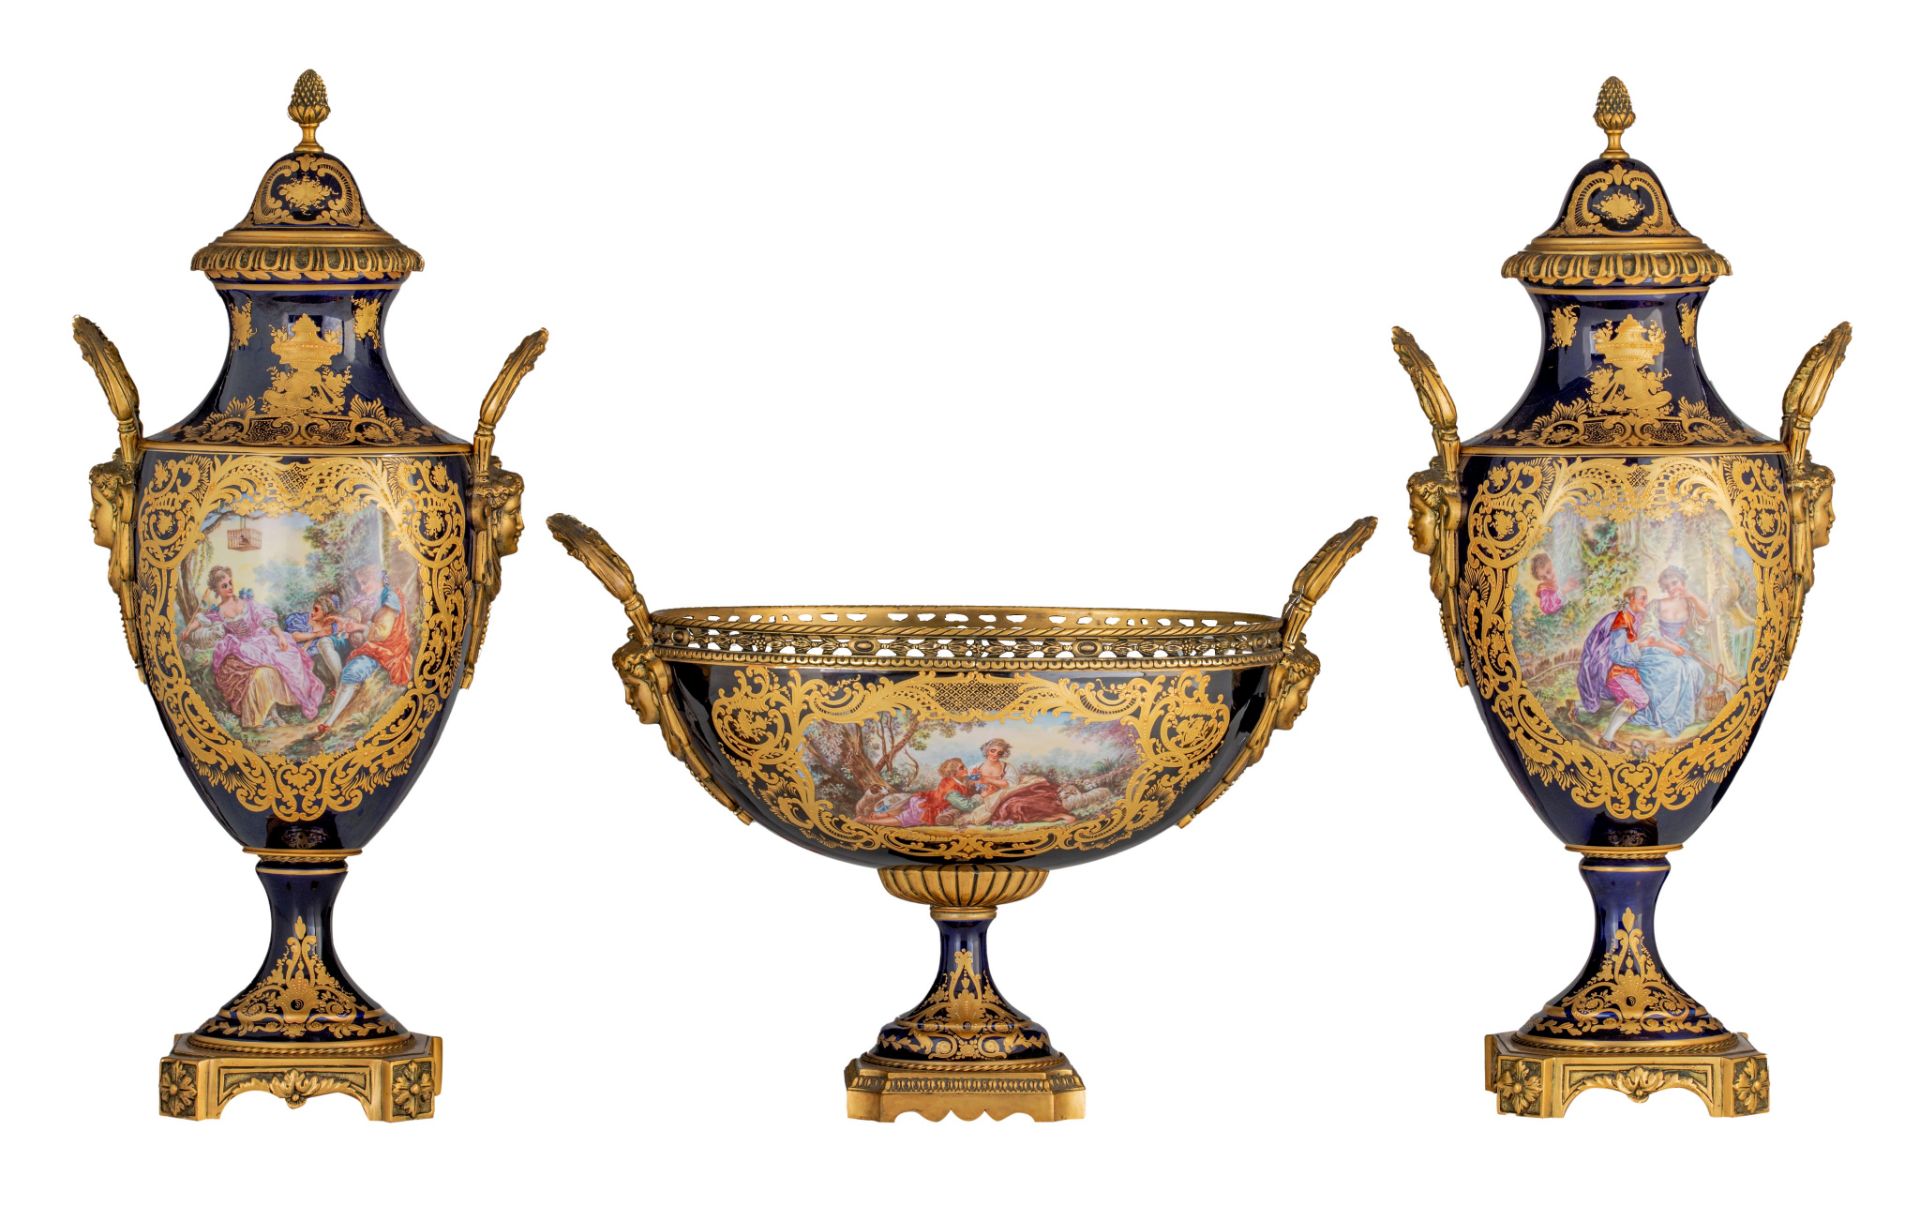 A three-piece SËvres type garniture set, with hand-painted roundels, H 34 - 59 cm